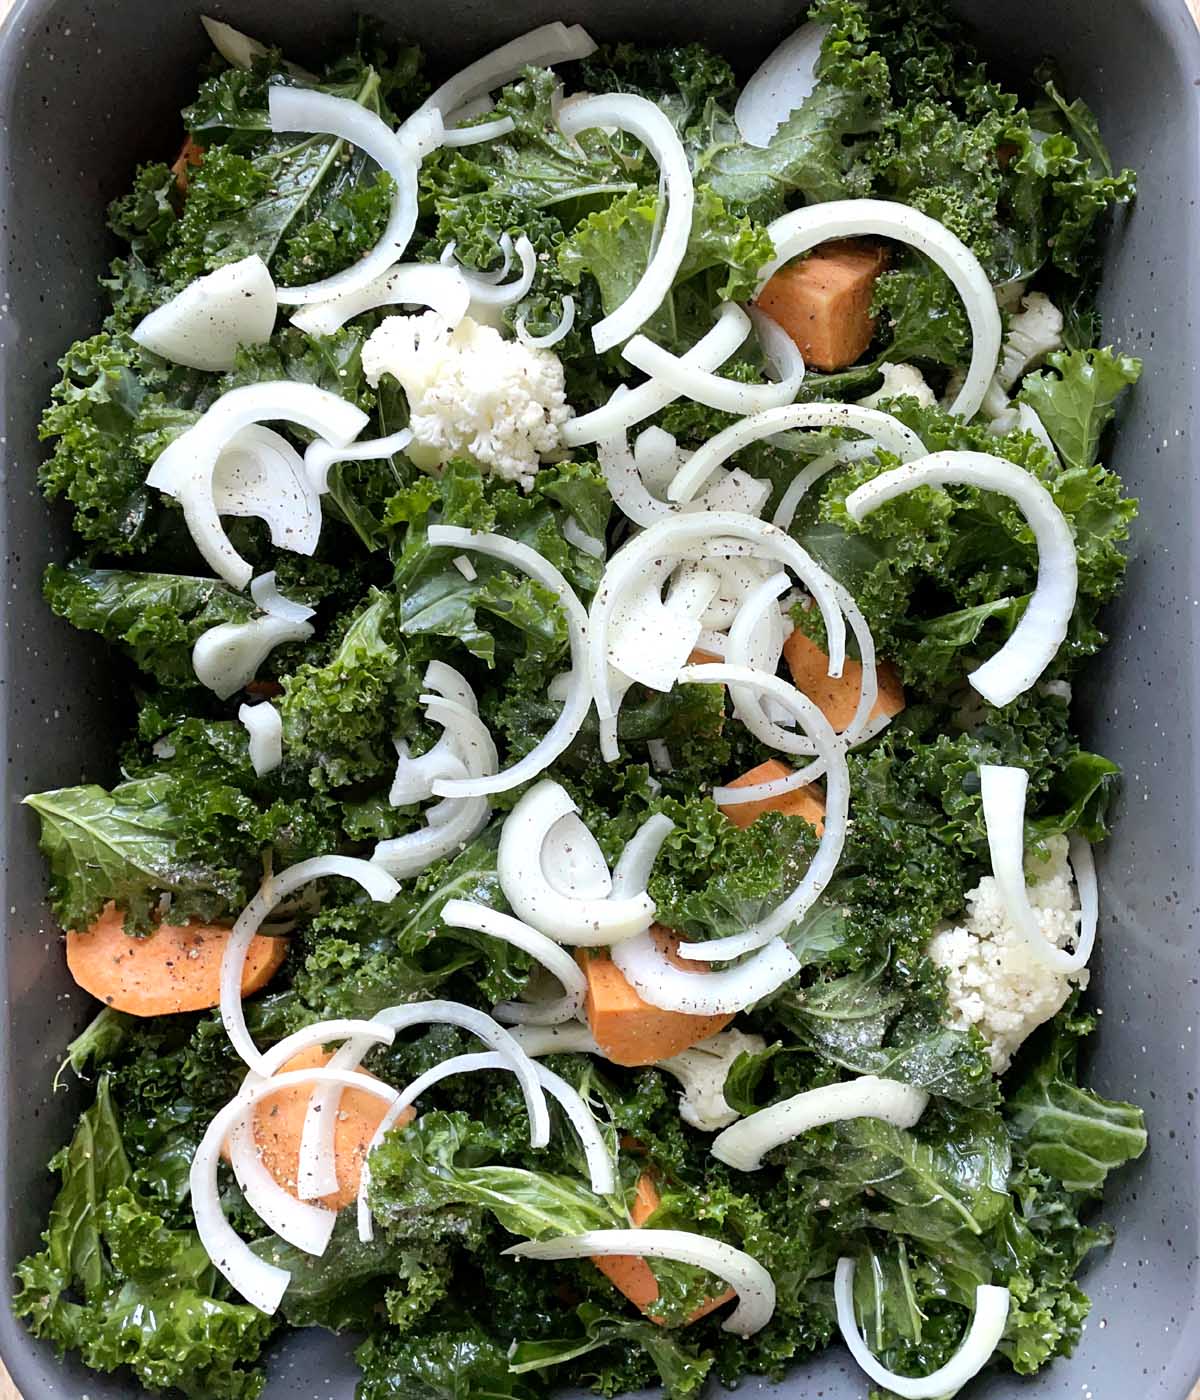 A rectangular roasting pan containing uncooked green kale, white cauliflower, orange sweet potatoes, and thinly sliced onions.